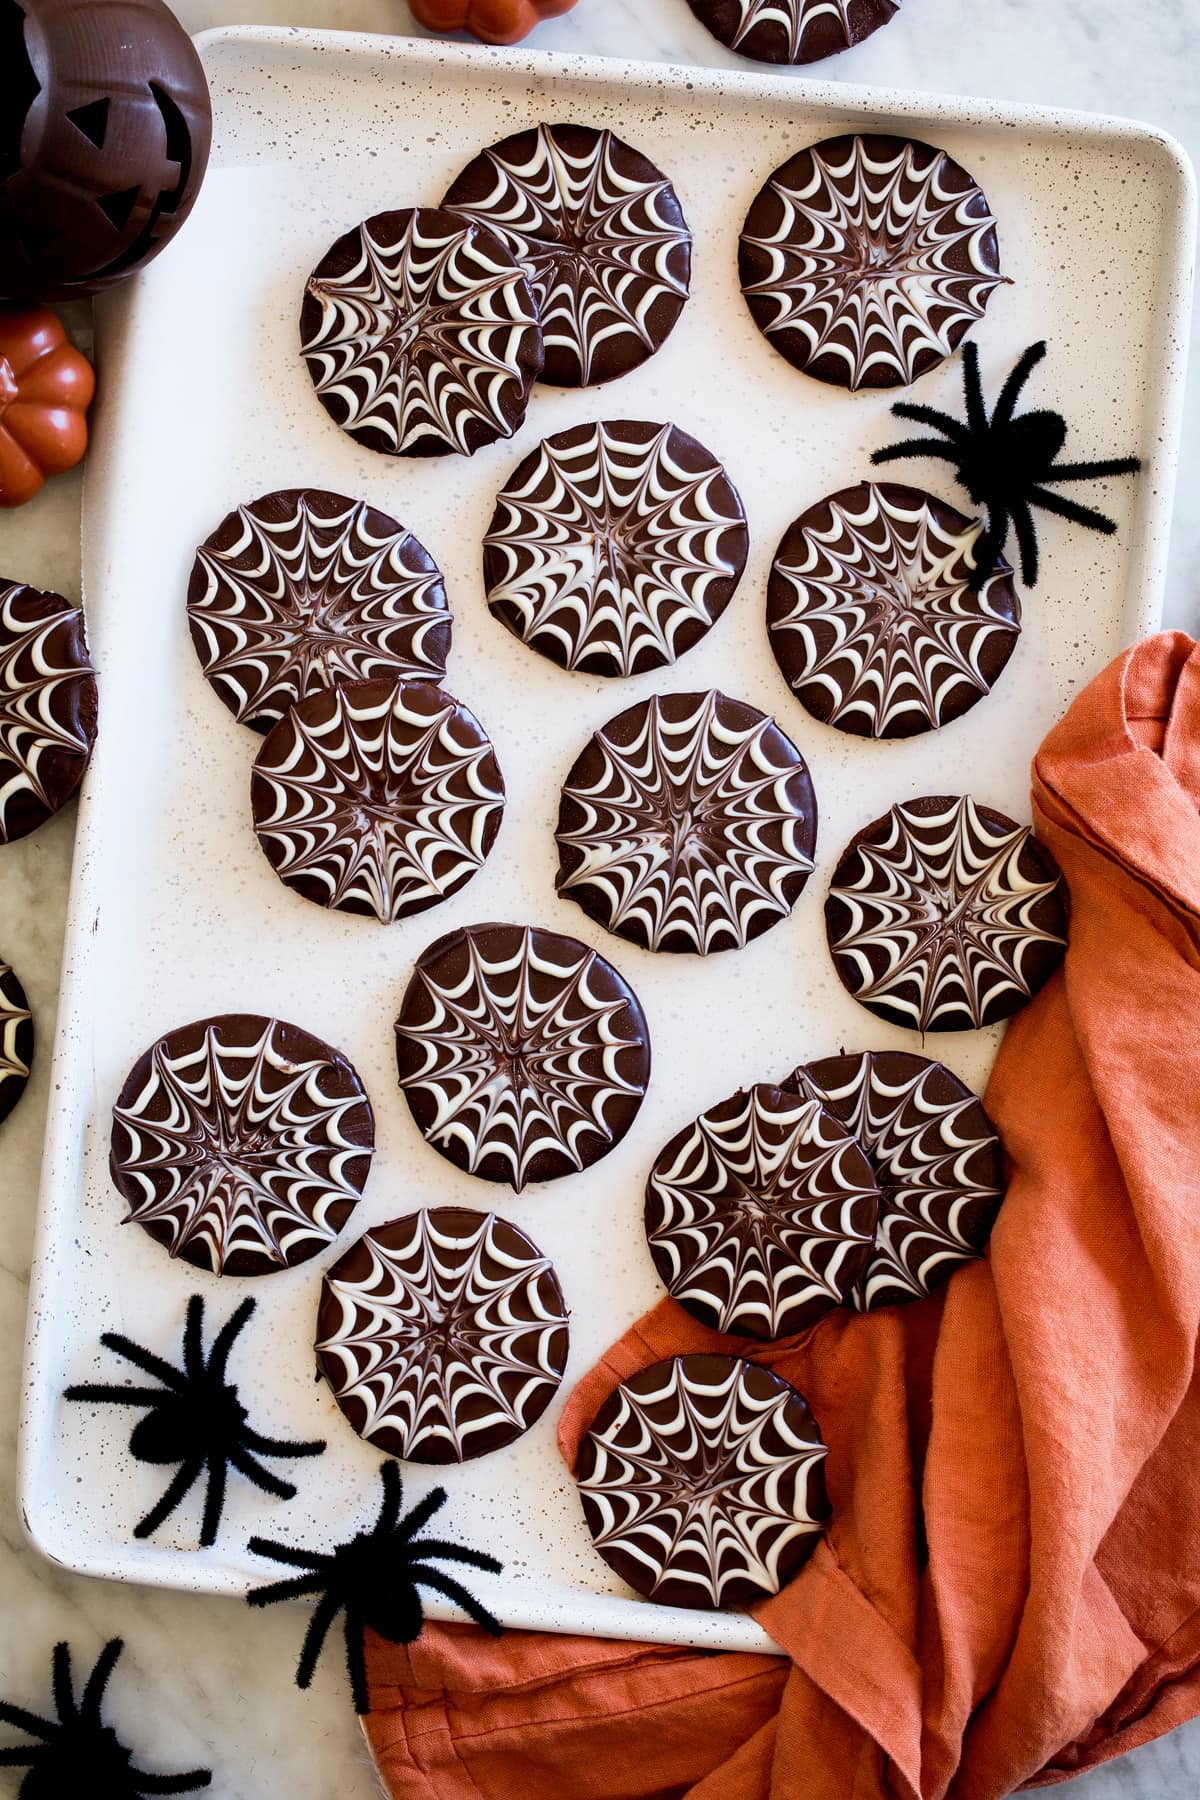 Chocolate halloween cookies shown from above.